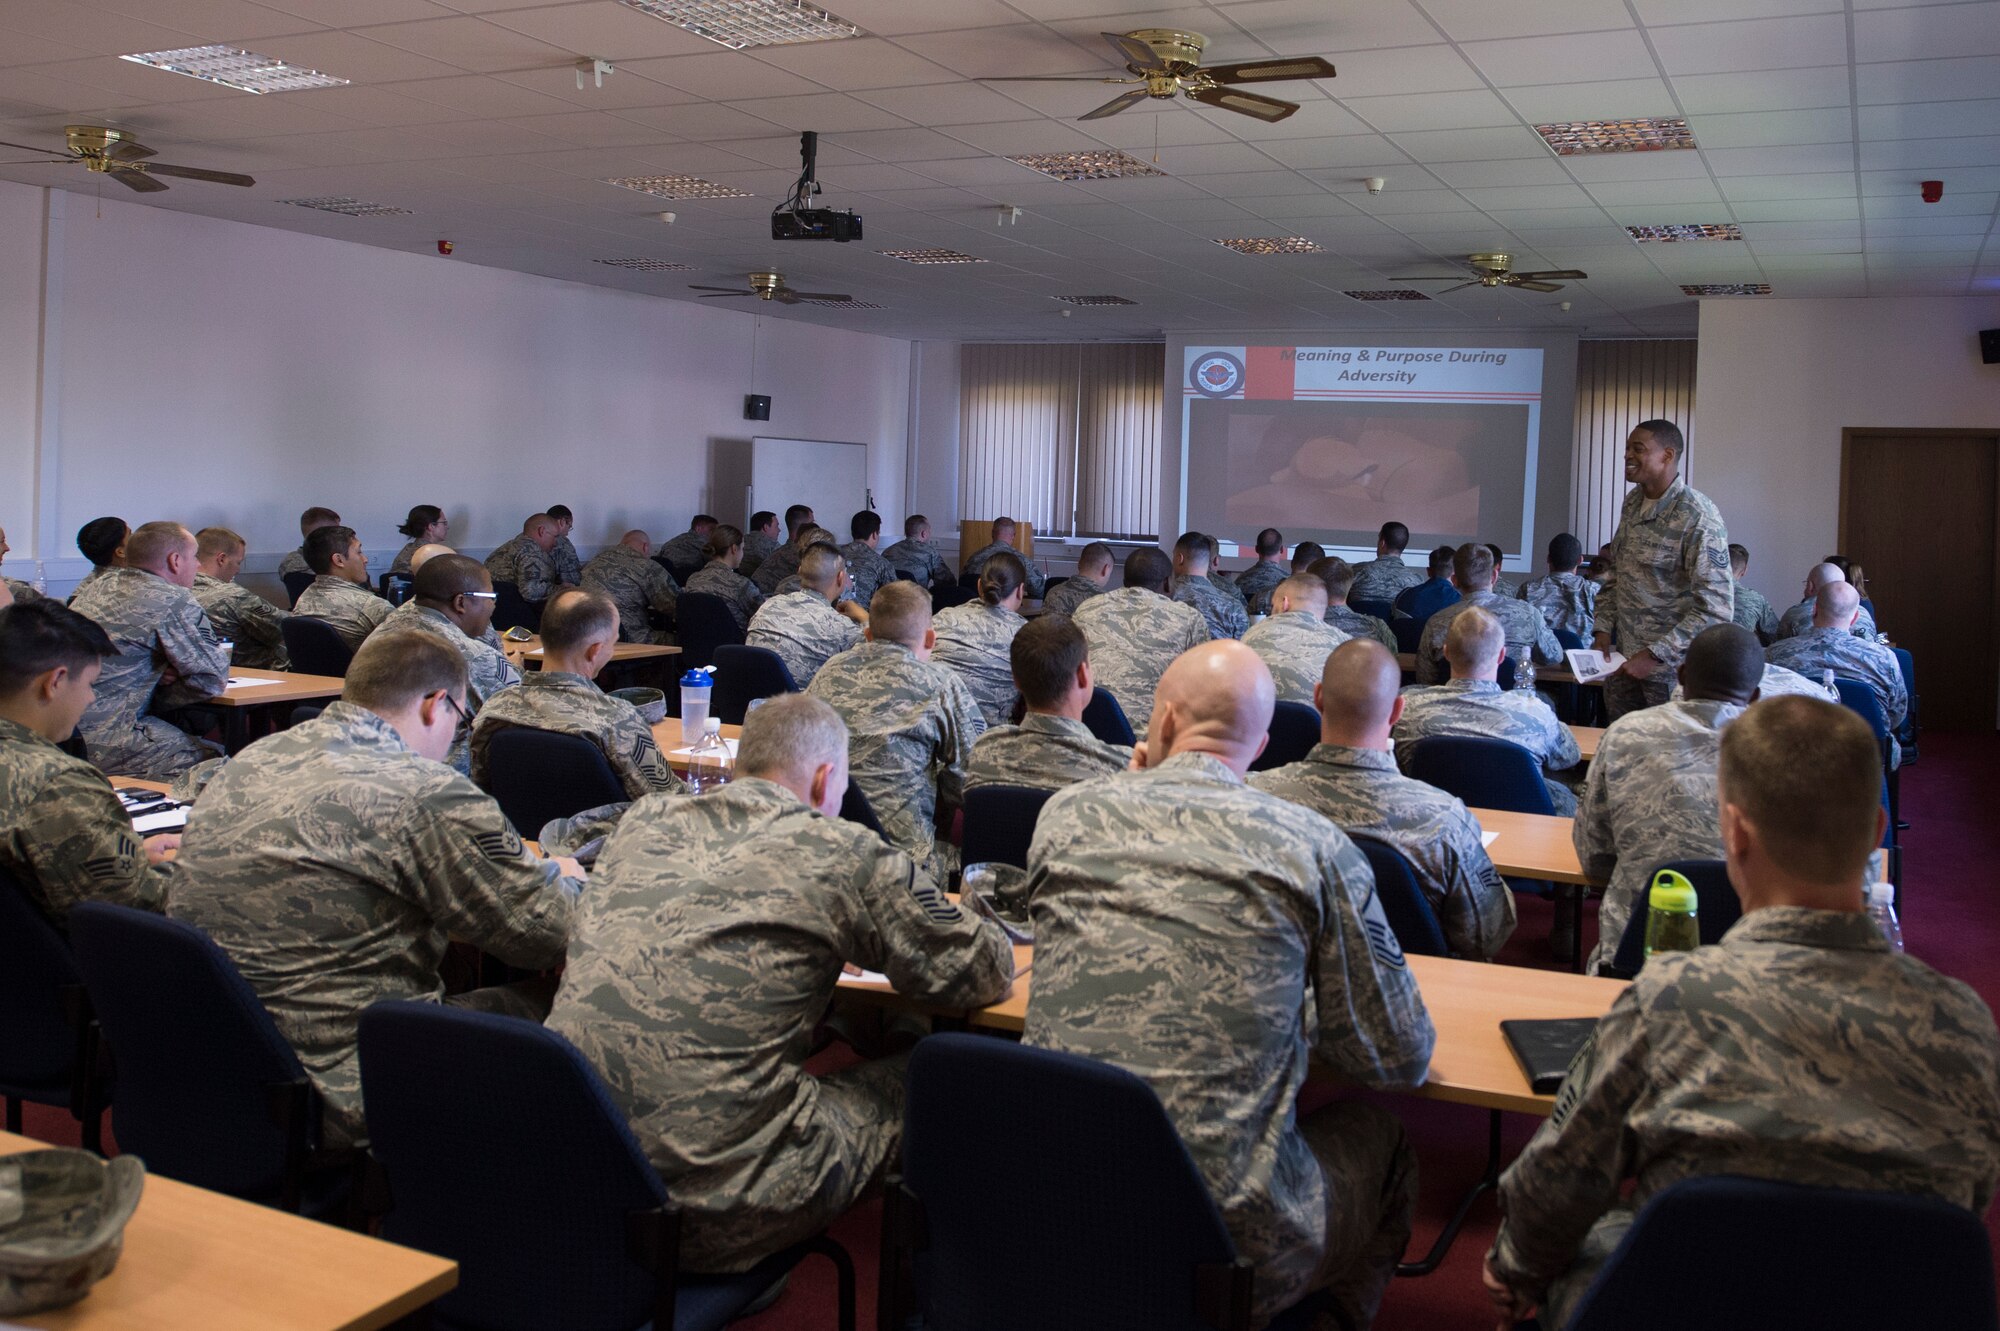 U.S. Air Force Tech. Sgt. Terrance West, 52nd Logistics Readiness Squadron fuel service center NCO in charge, teaches a Spiritual Resiliency 101 workshop in the Saber Conference Center on Spangdahlem Air Base, Germany, June 4, 2015, during the 52nd Fighter Wing’s Resiliency Day. More than 15 workshops throughout the day to inform Airmen on being spiritually fit as part of one of the pillars in the Comprehensive Airman Fitness initiative. (U.S. Air Force photo by Staff Sgt. Christopher Ruano/Released) 